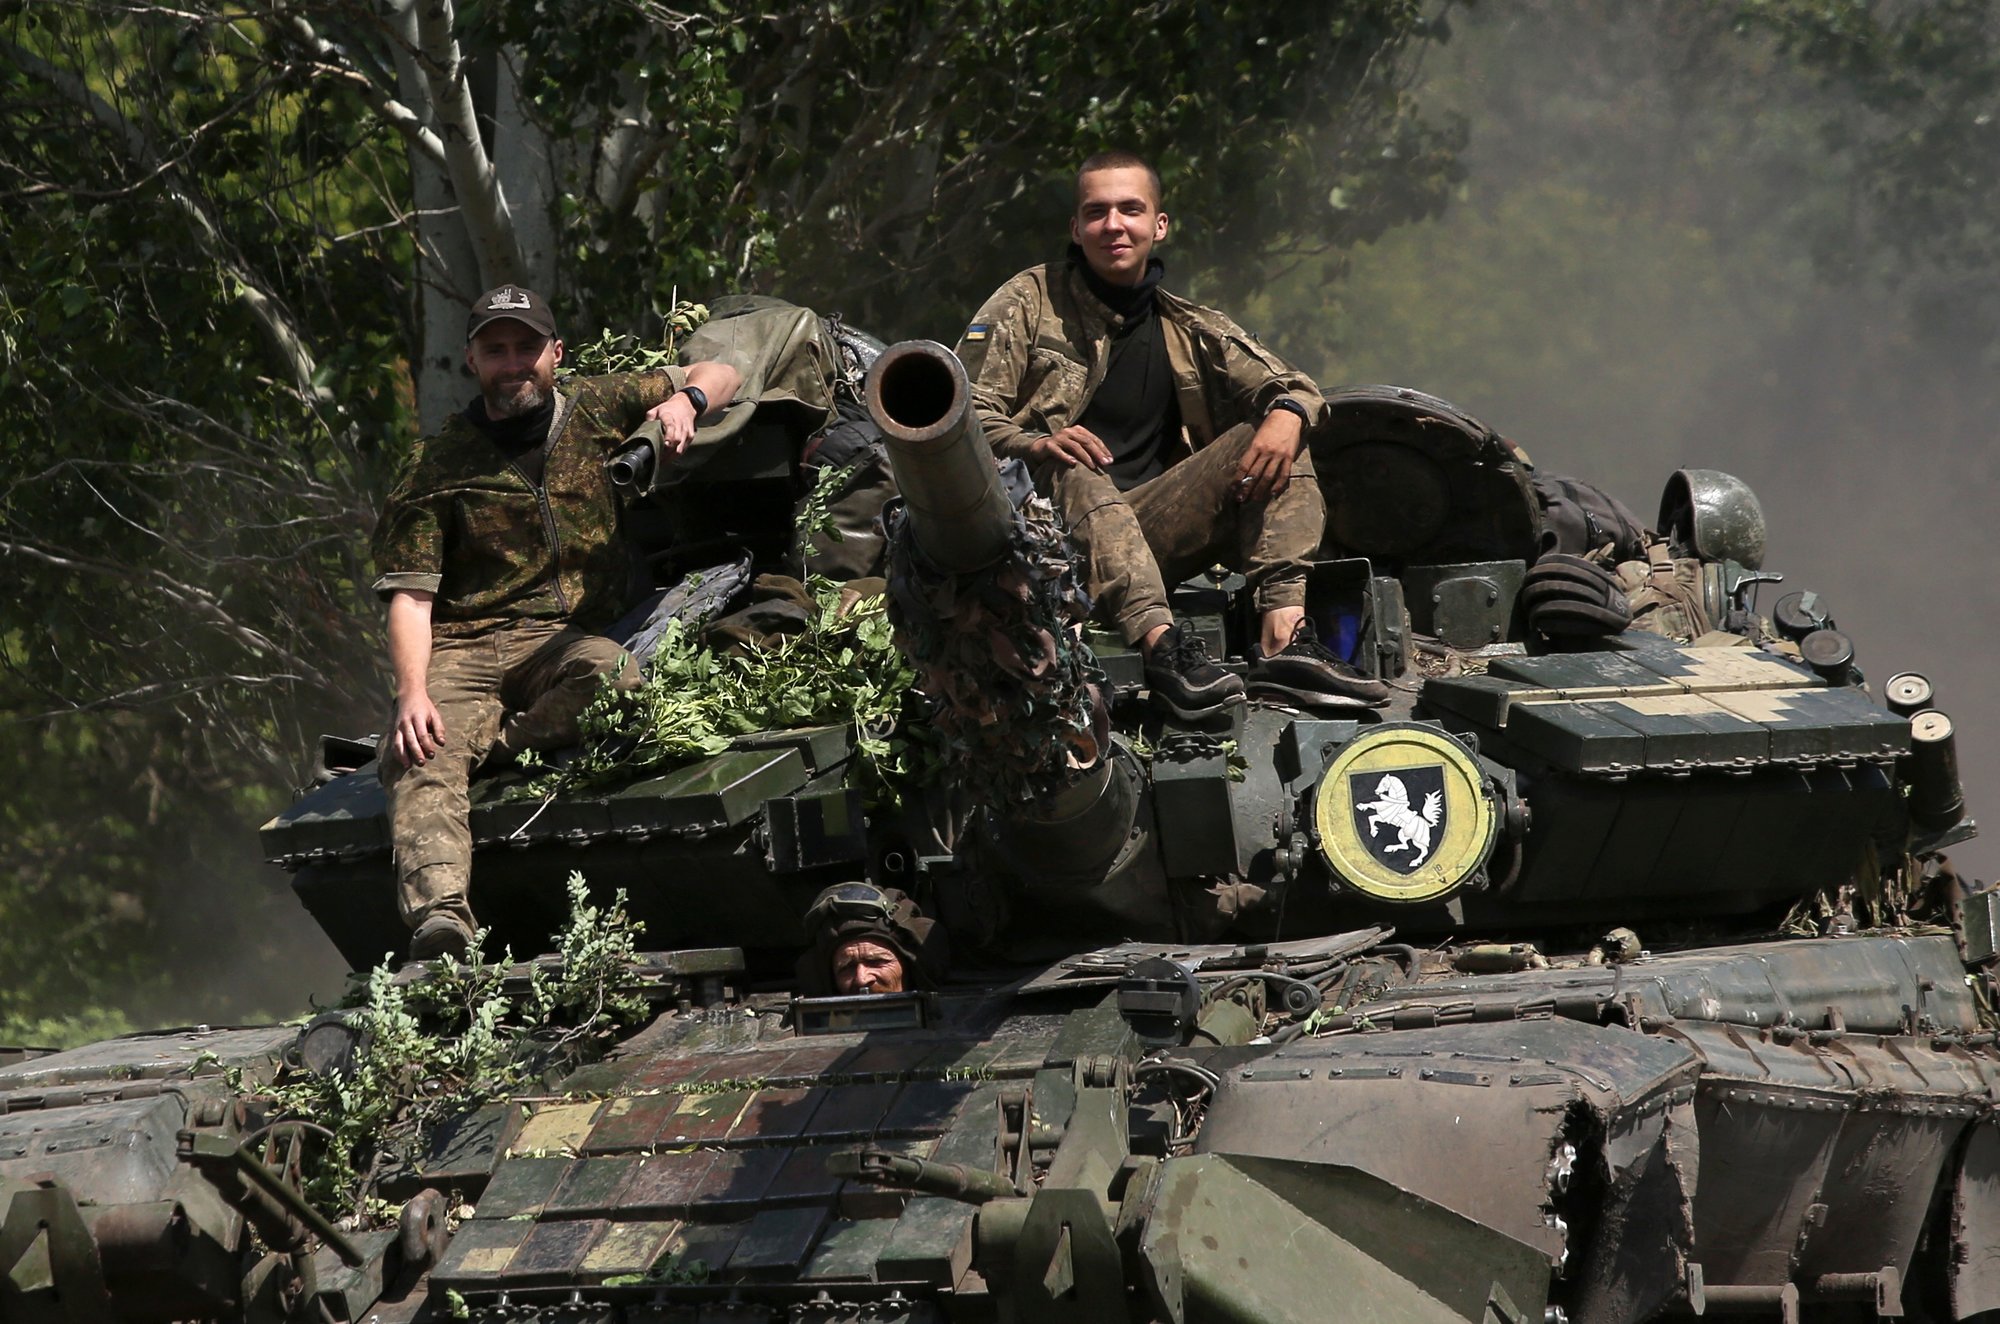 Ukrainian soldiers ride a tank on a road in the Donetsk region on July 20, 2022, near the front line between Russian and Ukrainian forces. Russia's top diplomat said Wednesday that Moscow's military aims in Ukraine were no longer focused "only" on the country's east, adding that supplies of Western weapons had changed the Kremlin's calculus. Photo by Anatolii Stepanov / AFP via Getty Images.